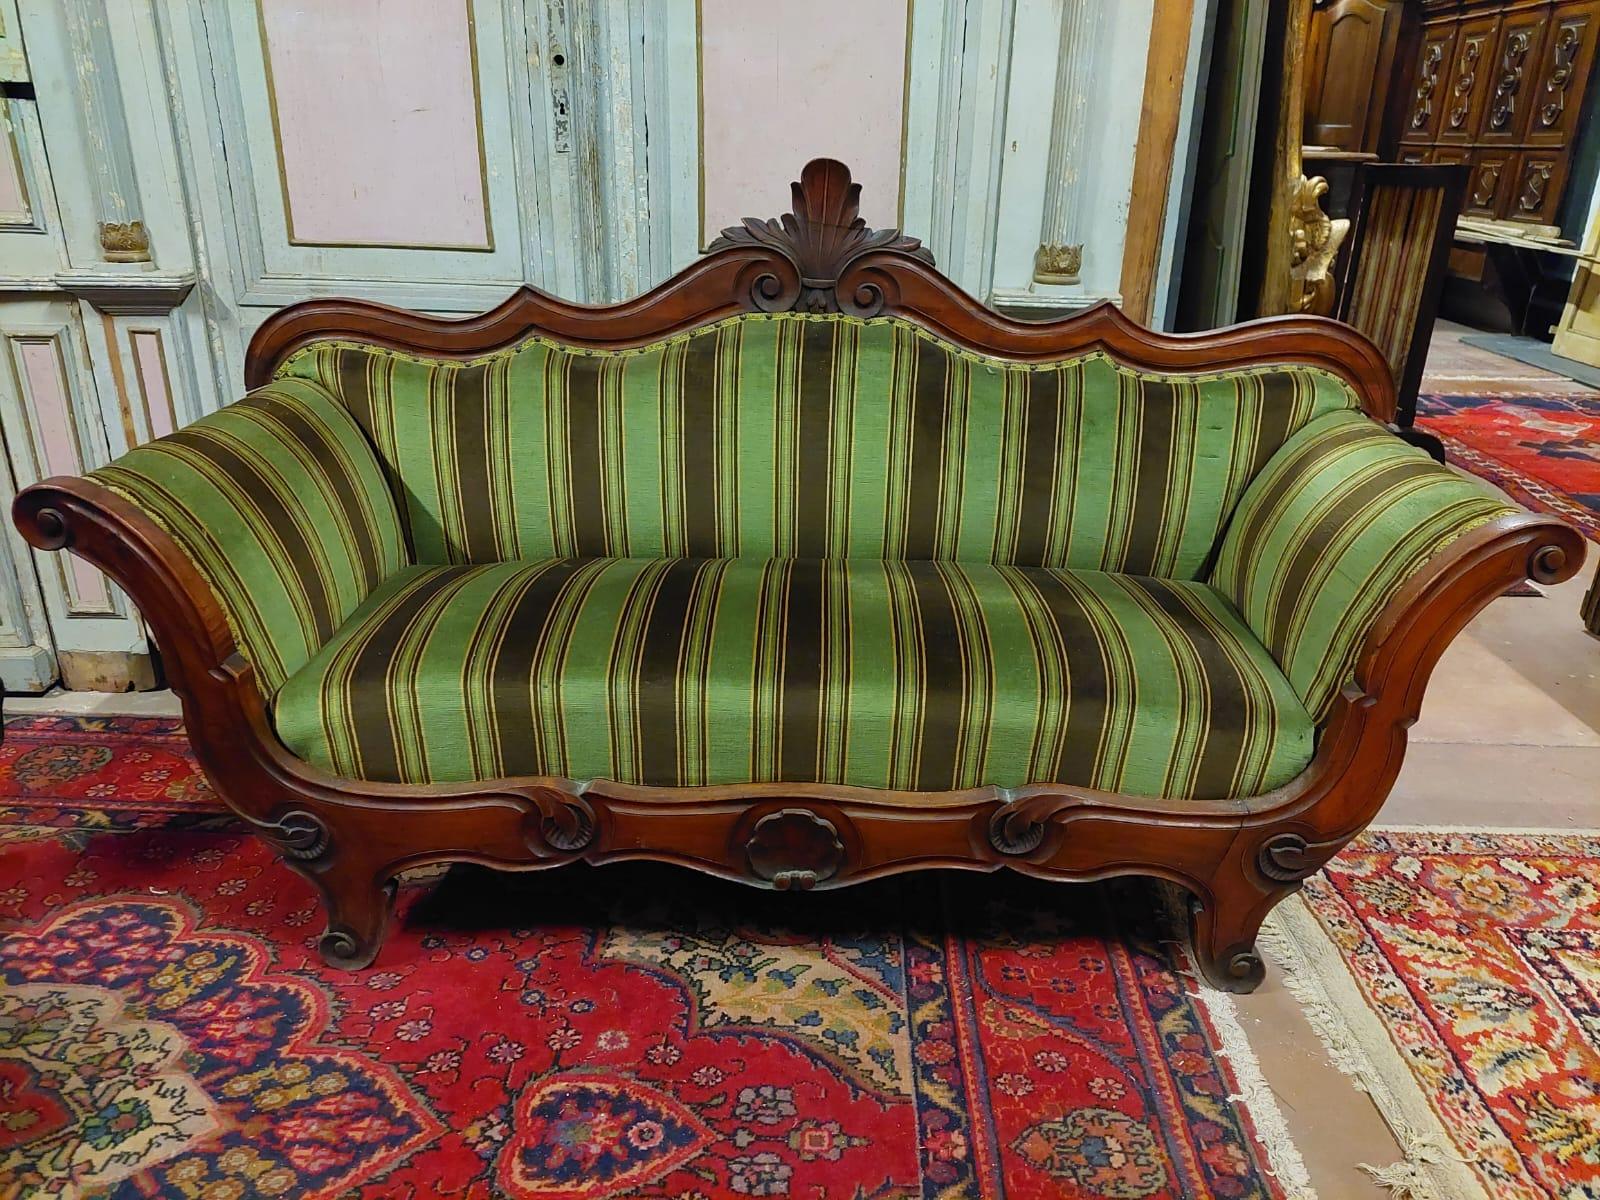 Antique and elegant Louis Philippe style sofa, hand-built in precious solid walnut wood inlaid with floral motifs and complete with green striped fabric, built in the 19th century in Italy.
Elegantly and finely carved and padded in the seat, back